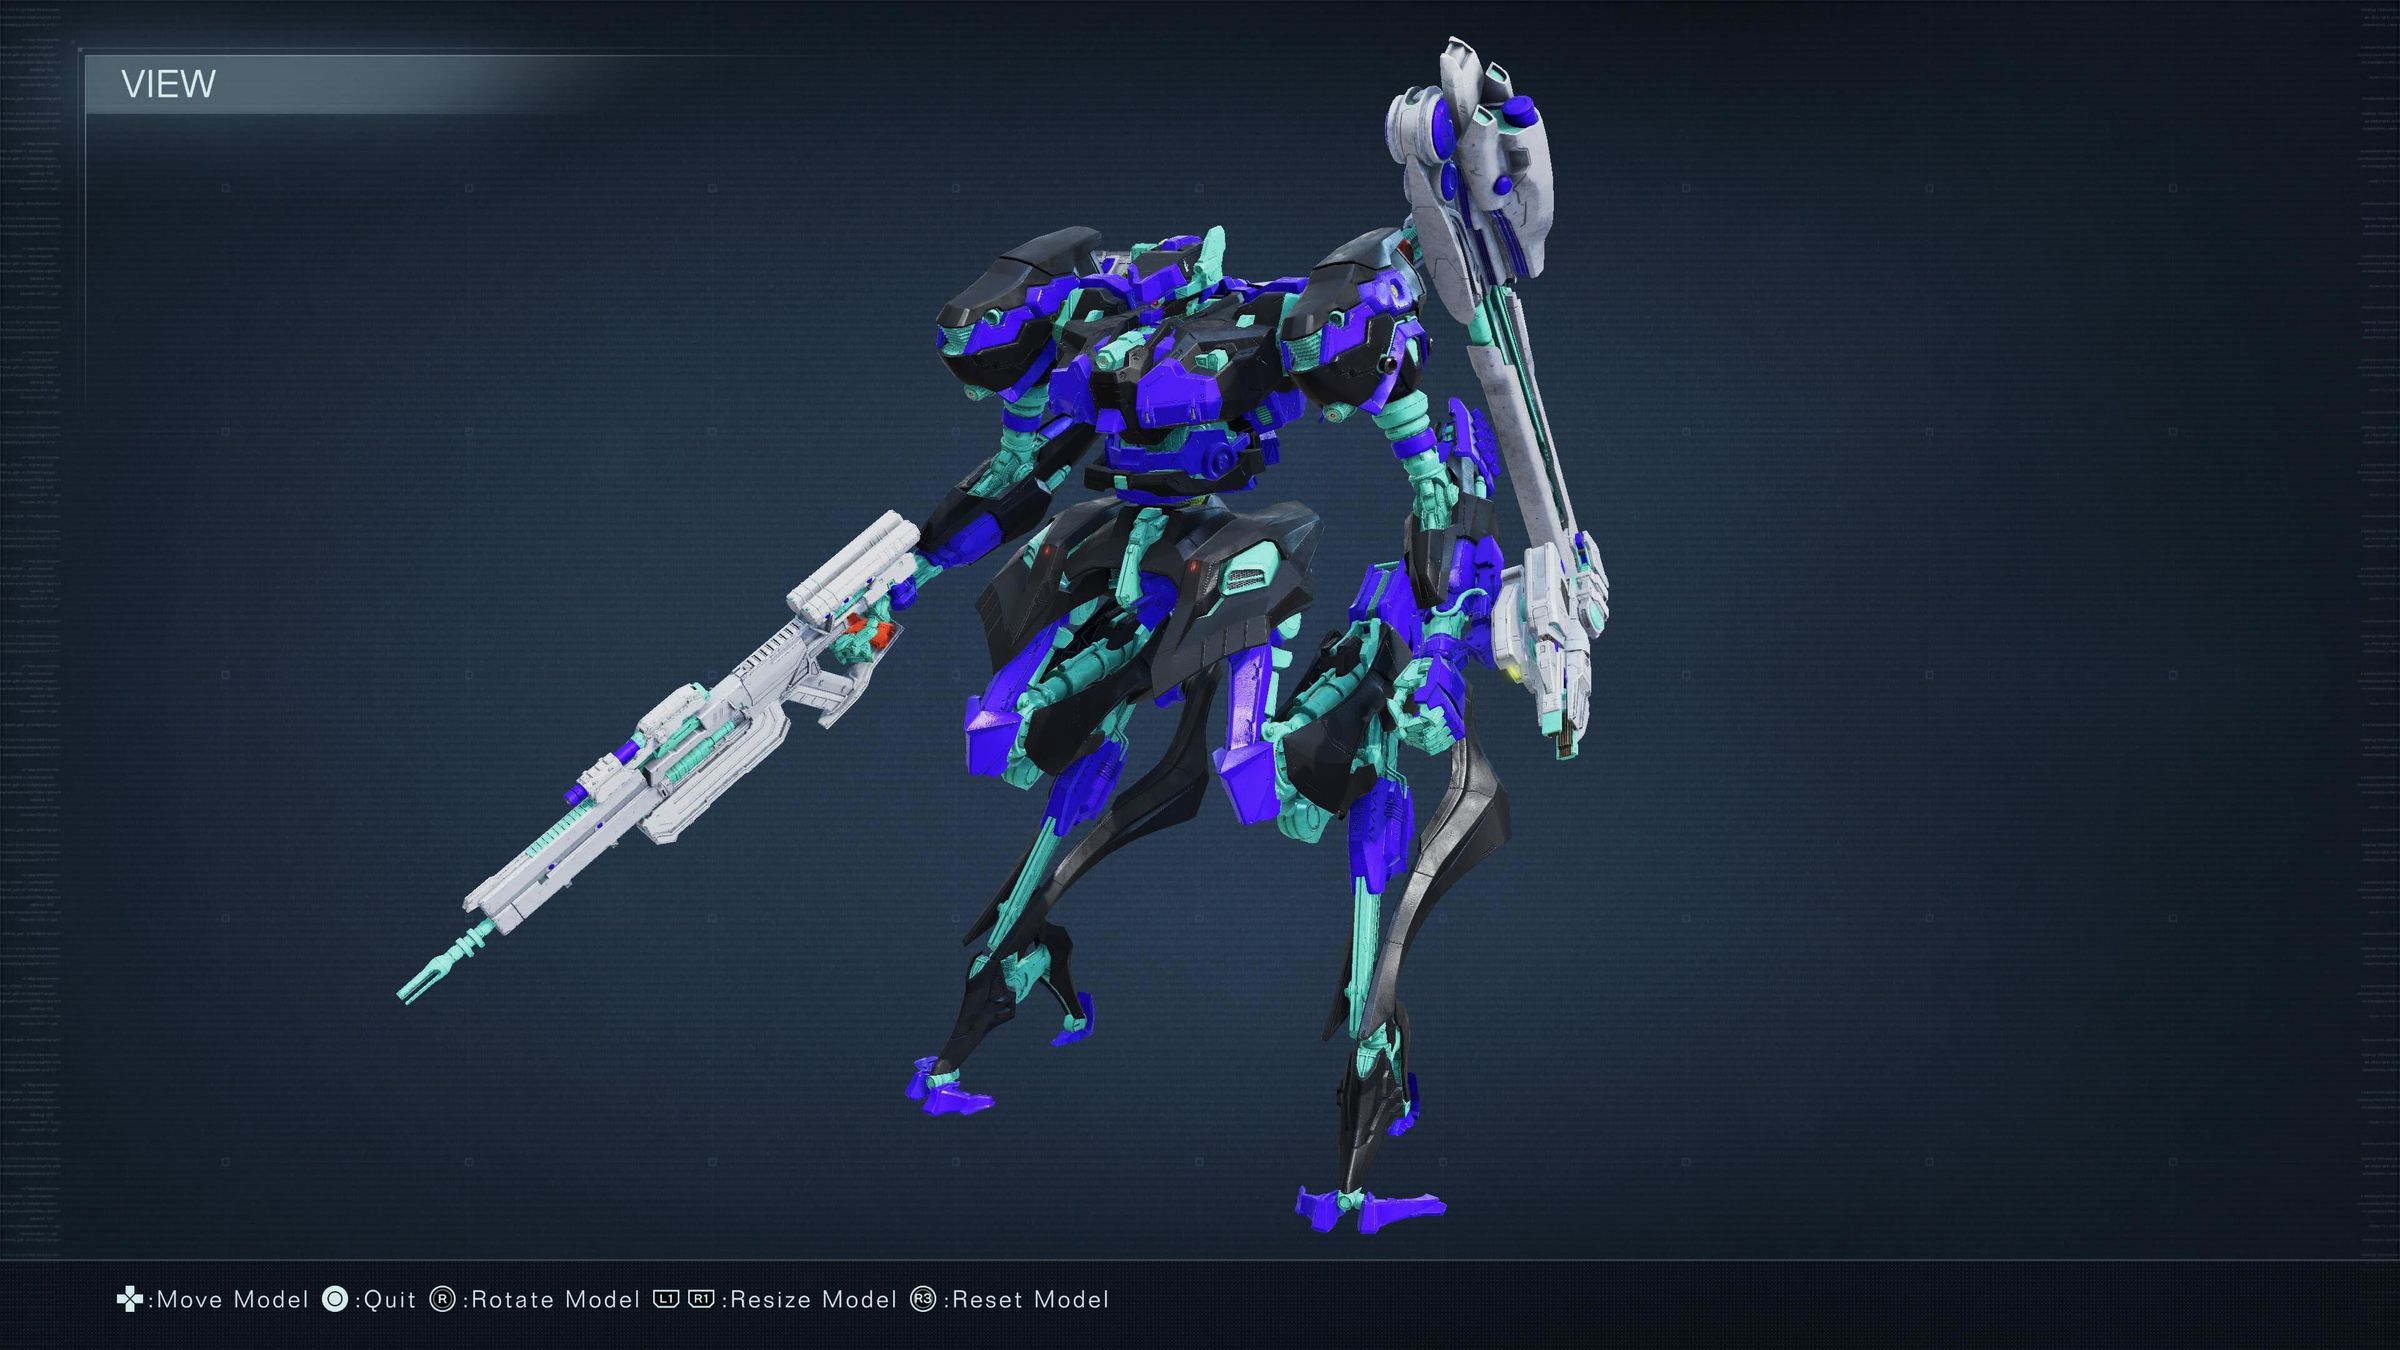 I can attest that you can make a Verge-themed mech in Armored Core VI.